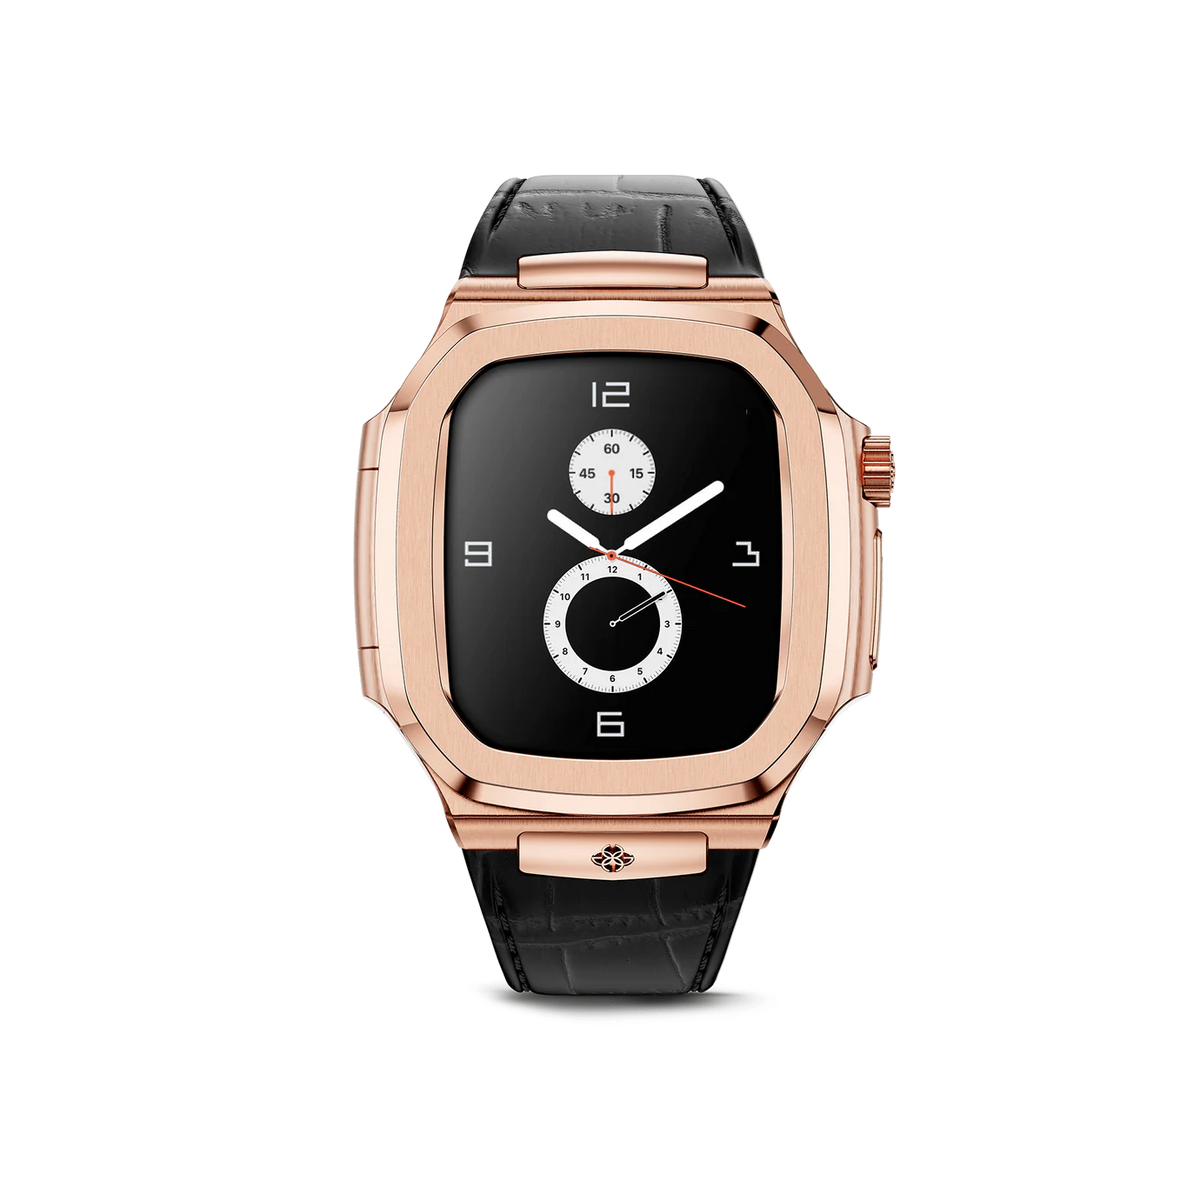 Apple Watch 9/8/7 Case ROL, Rose Gold/Leather | Golden Concept - Wake Concept Store  